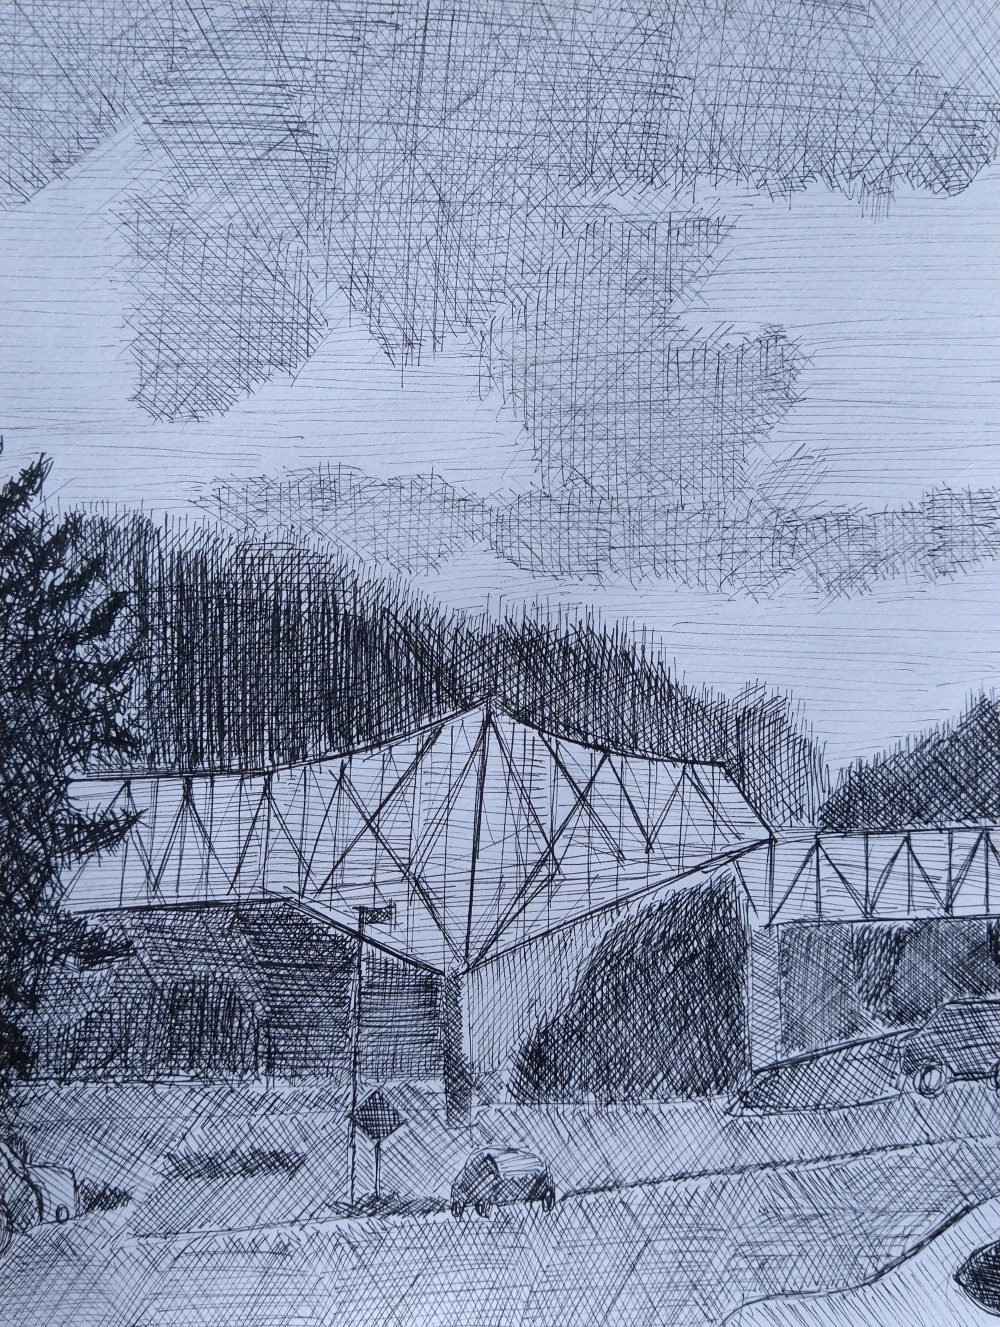 An ink drawing in black and white, of the Bridge of the Gods in Cascade Locks, Oregon, with hills in the background and an overcast sky.